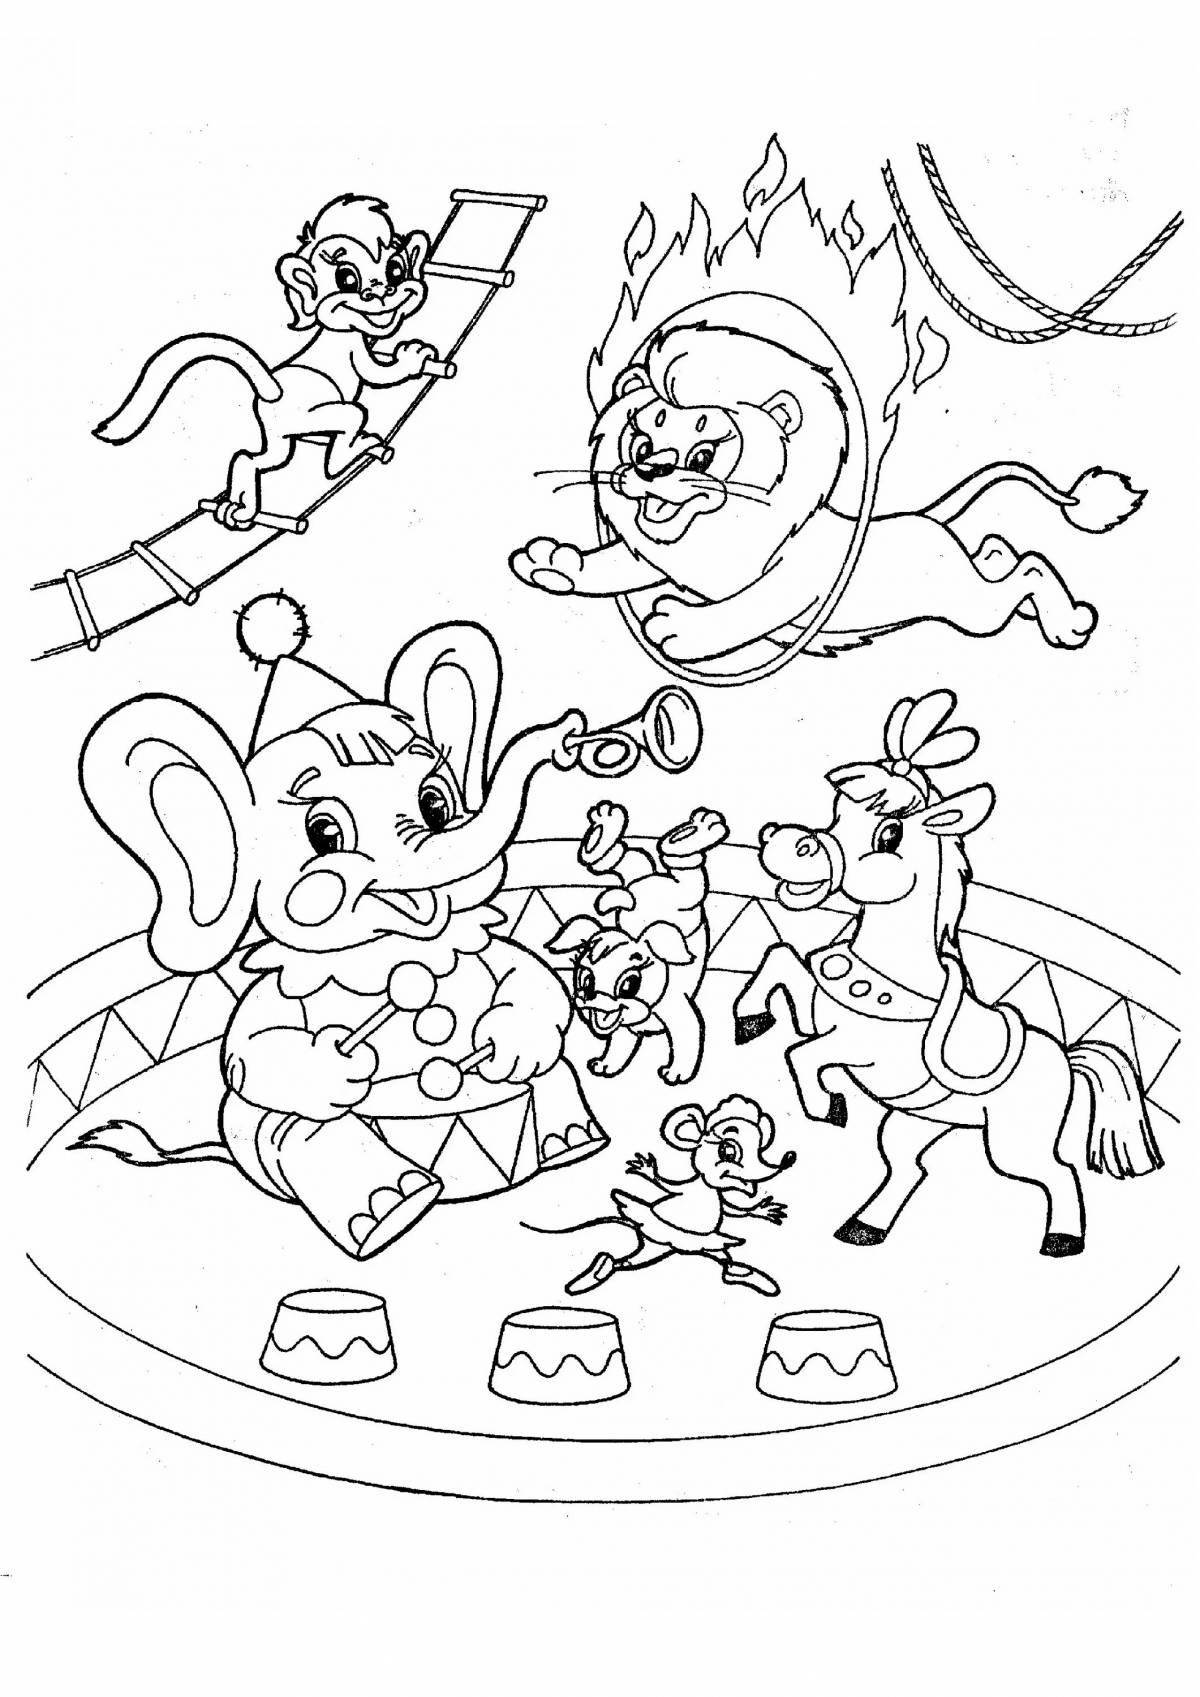 Playful circus coloring book for 5-6 year olds